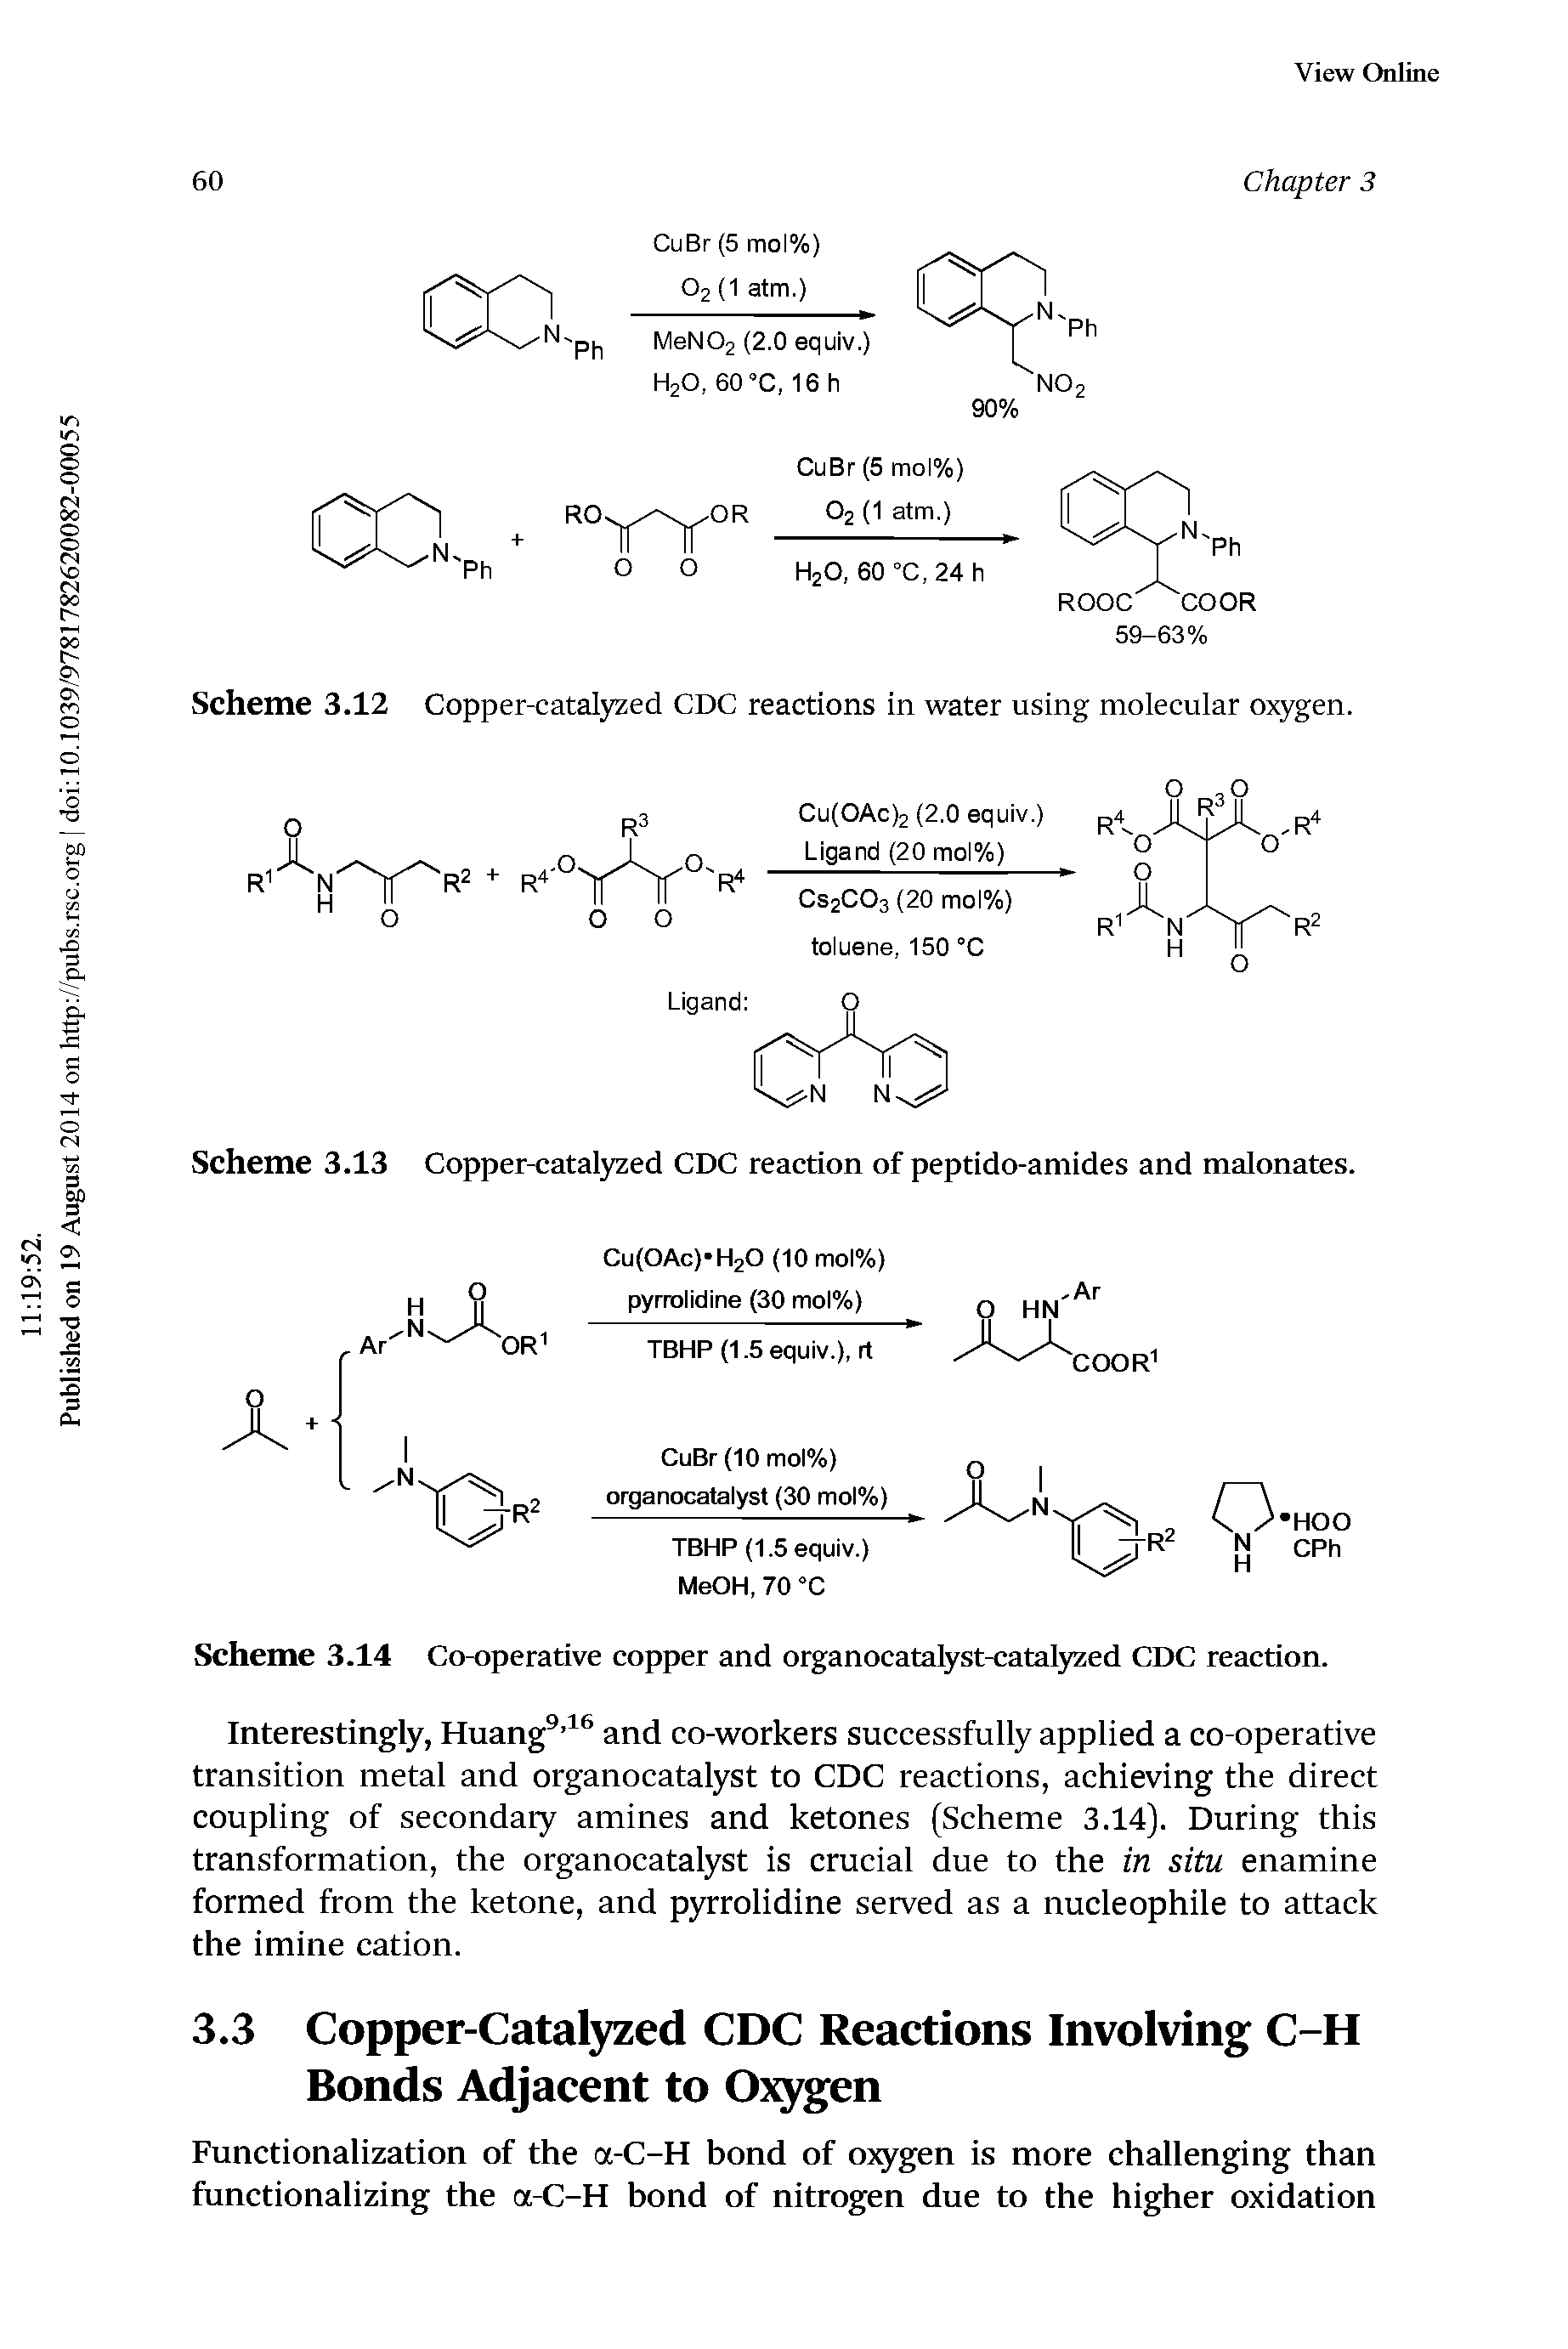 Scheme 3.14 Co-operative copper and organocatalyst-catalyzed CDC reaction.